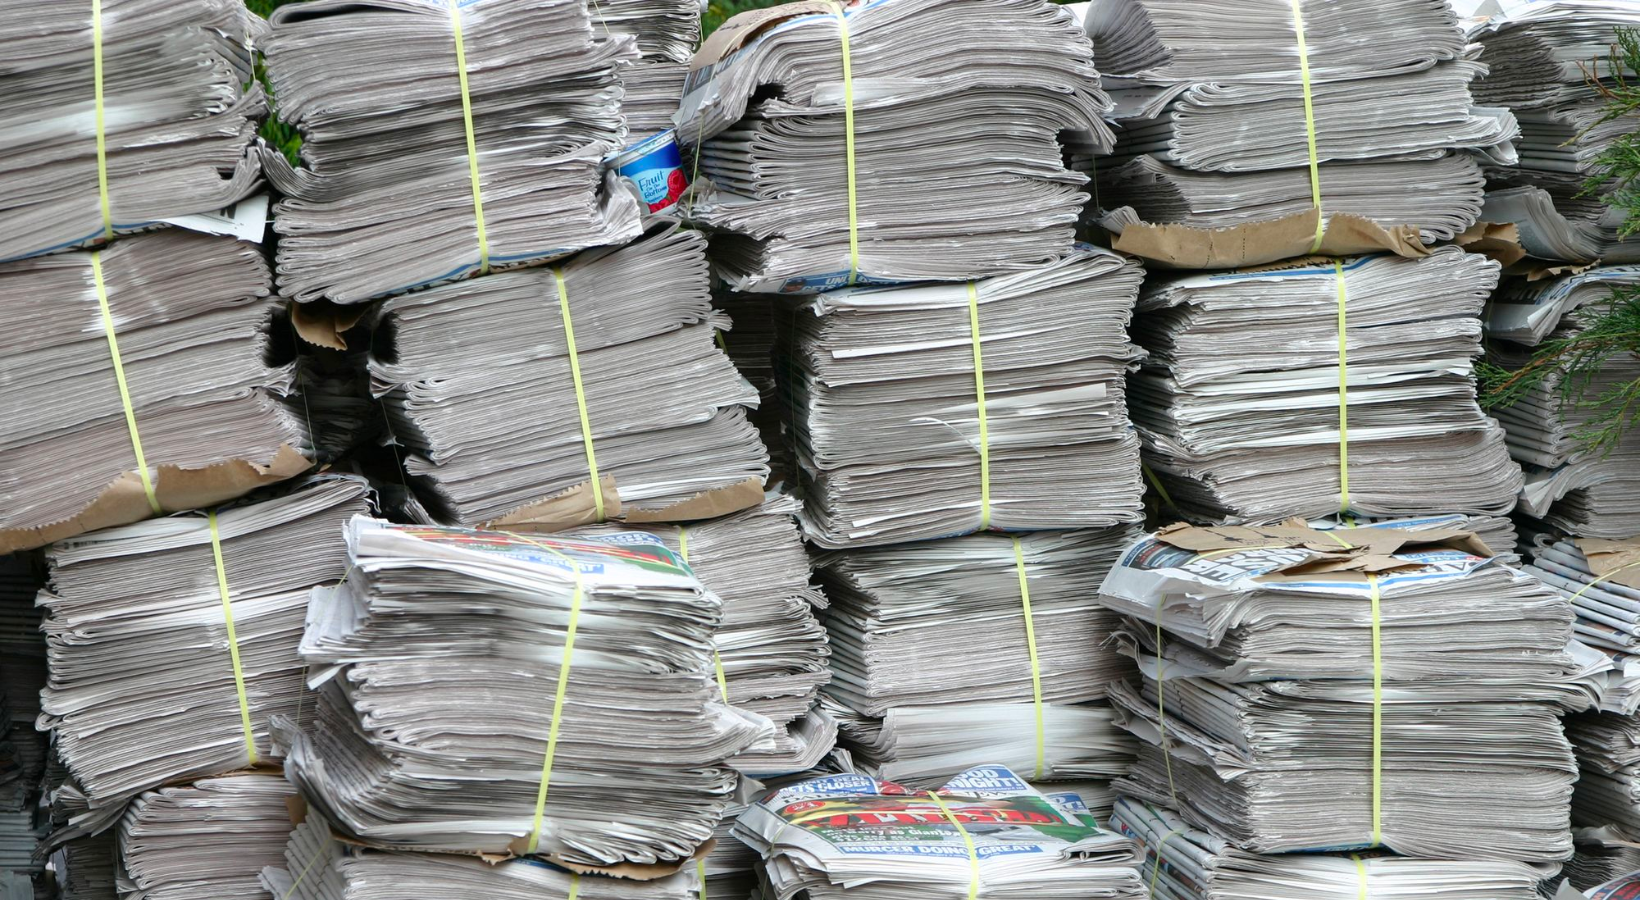 Multiple stacks of newspapers